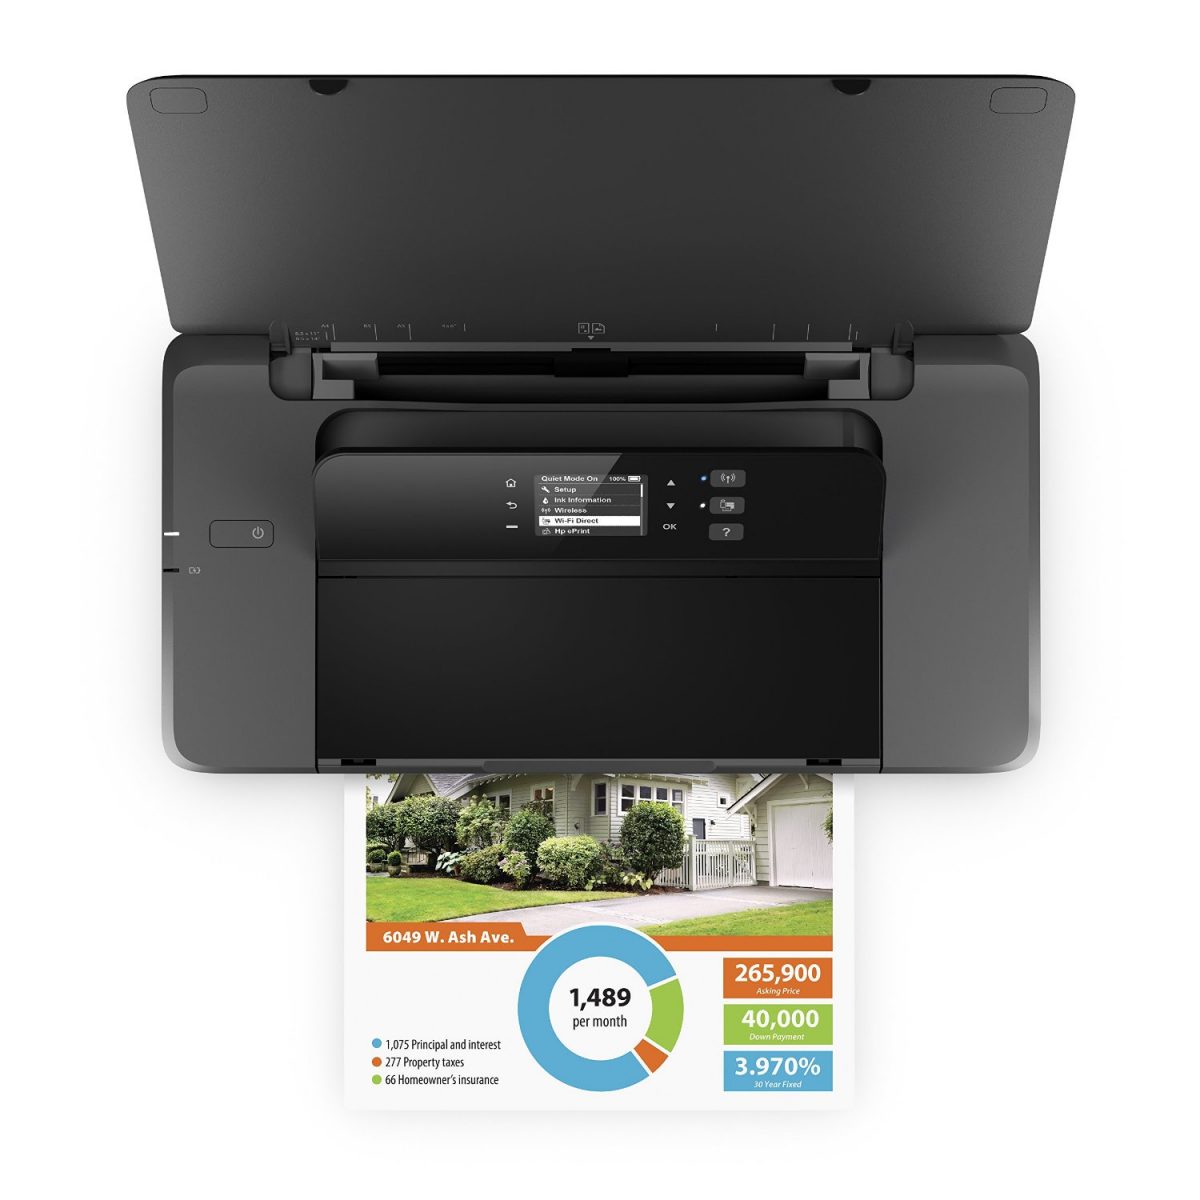 HP OfficeJet 200 Mobile Printer Truly Delivers a Mobile Office ...